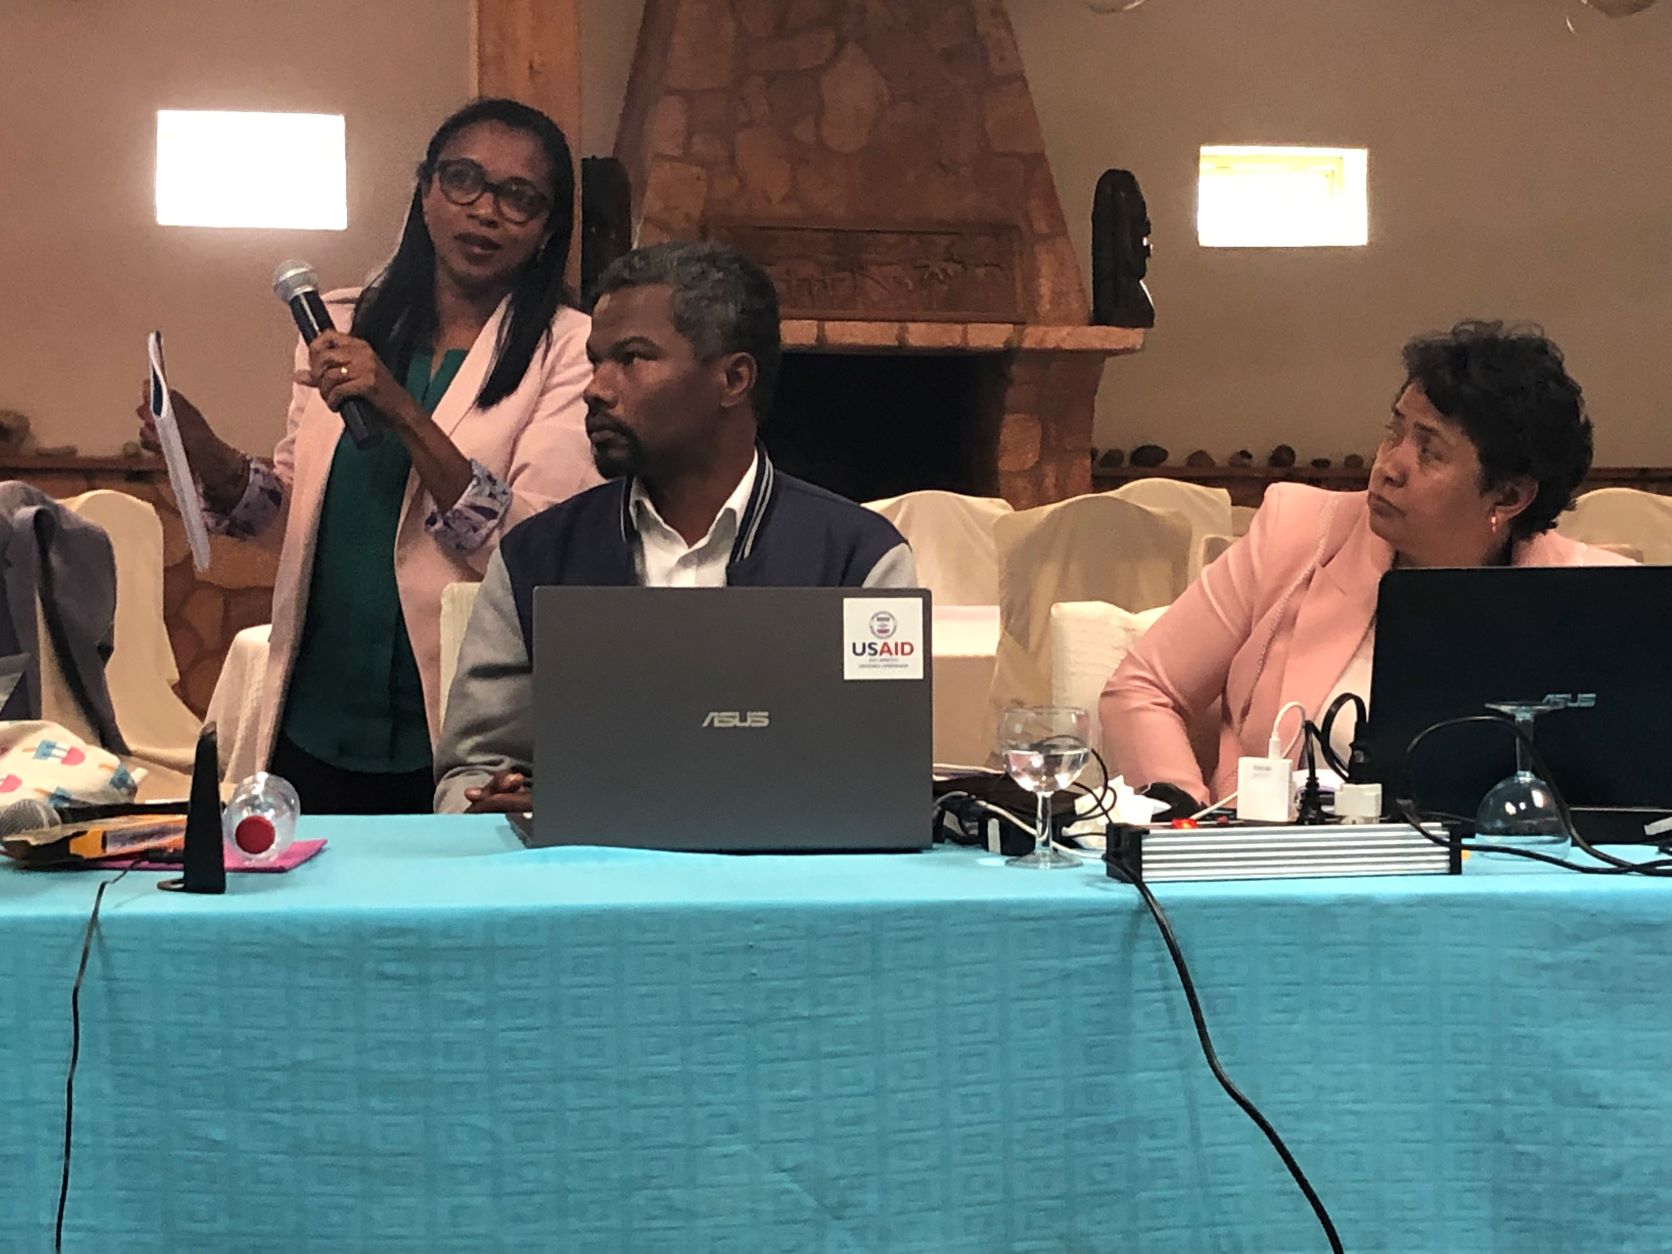 Court of Accounts of Madagascar: planning the work for 2023